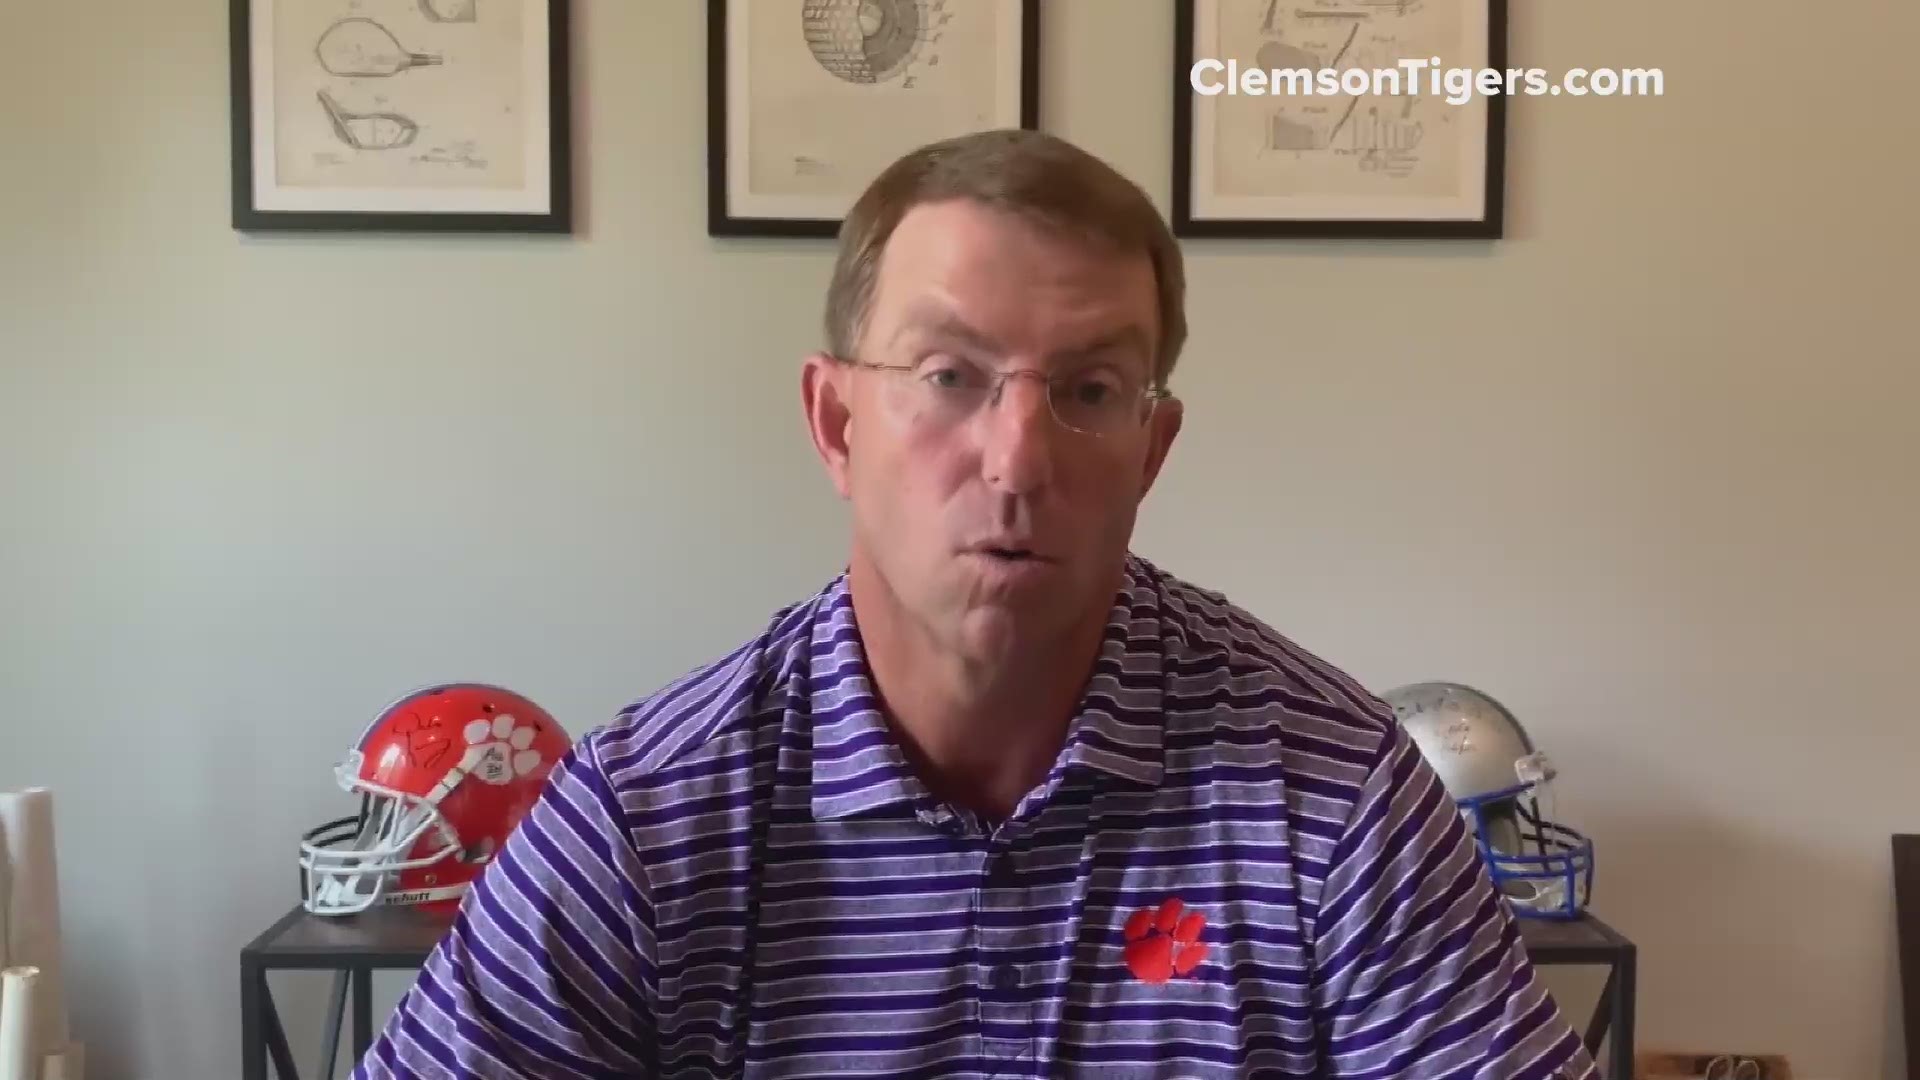 Clemson football head coach Dabo Swinney responded in a video message to criticism of both he and his program on how they handle matters of race.